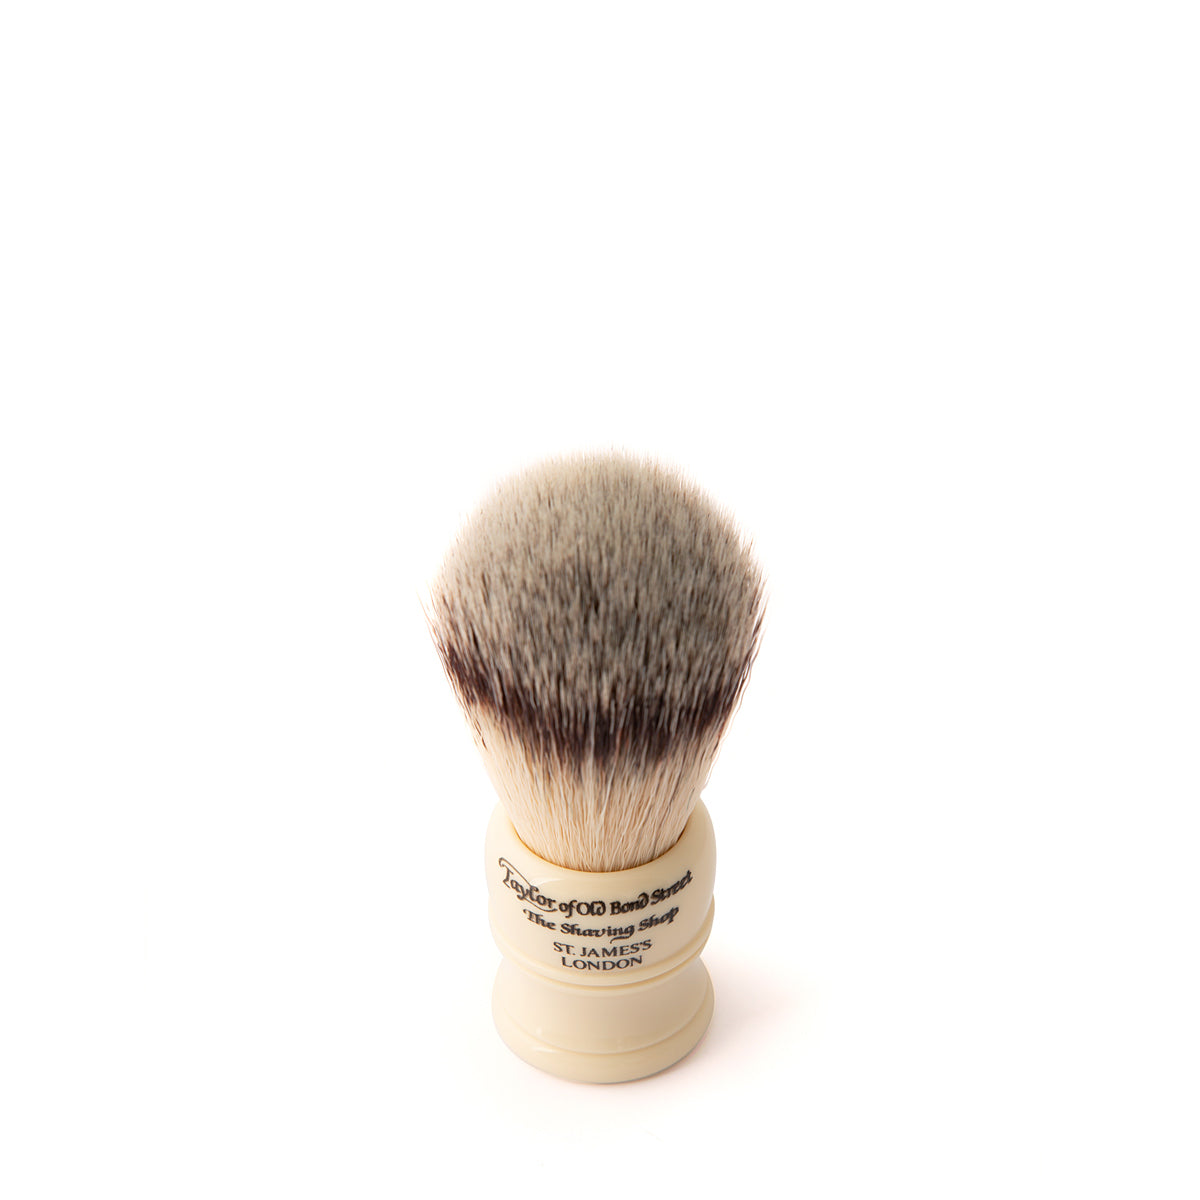 Taylor of Old Bond Street Small Contemporary Synthetic Shaving Brush